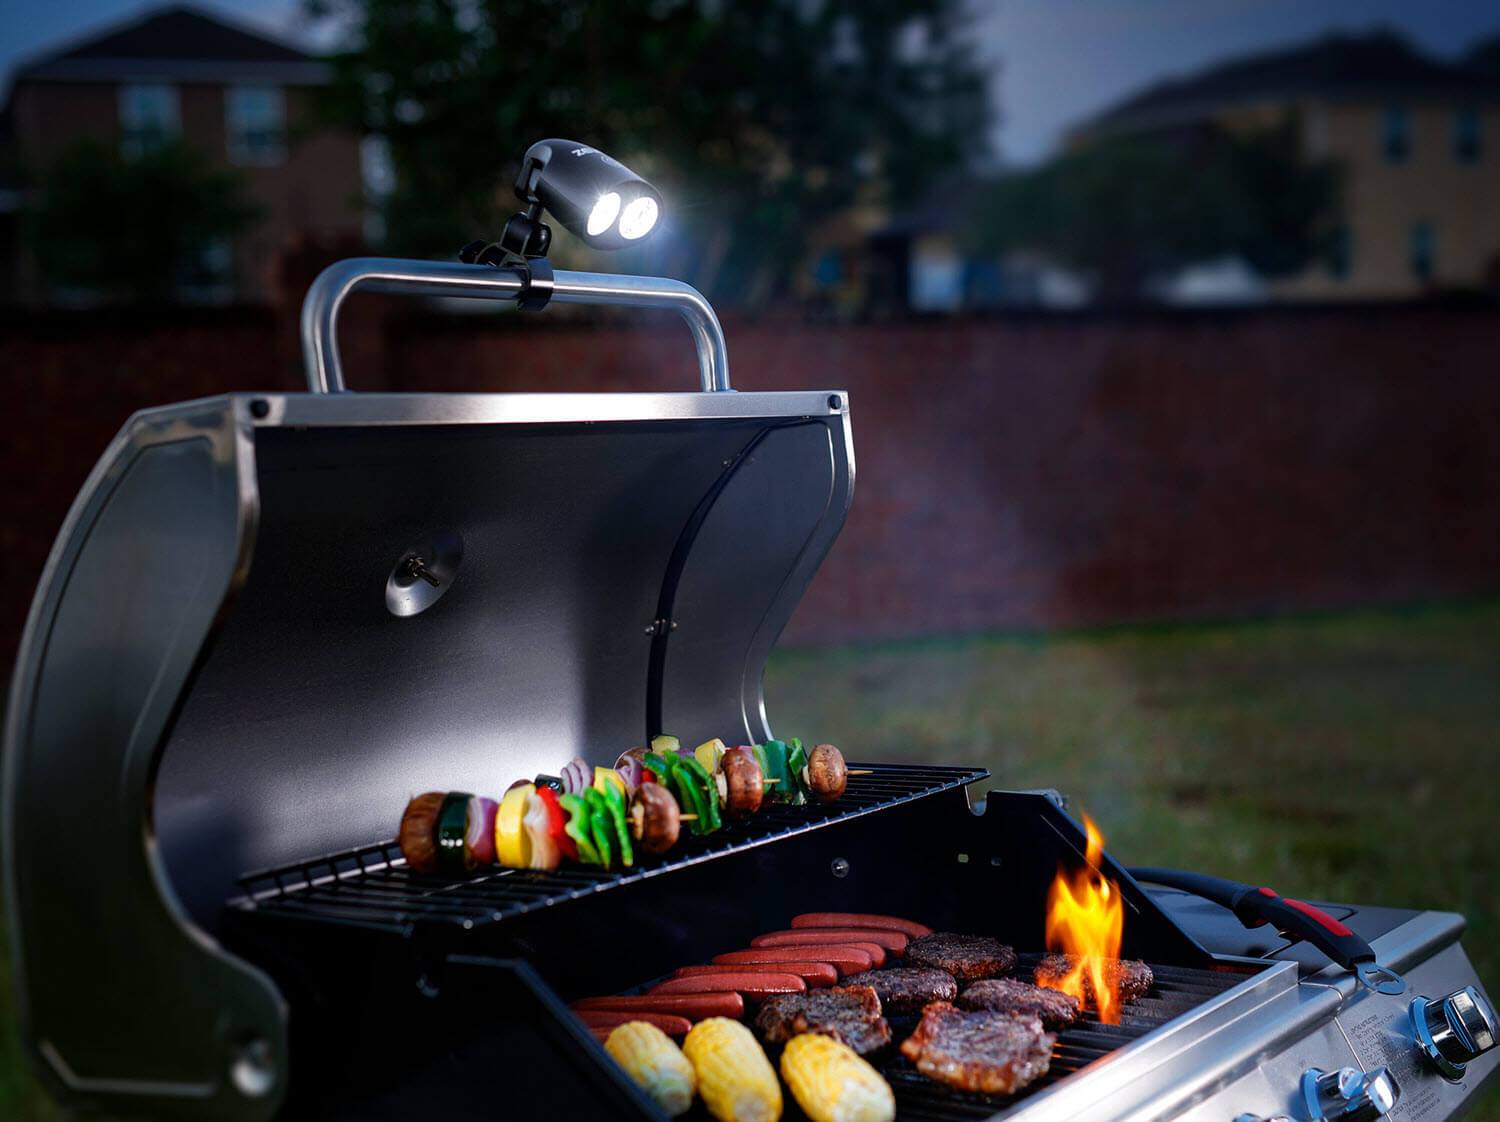 BBQ Grill Light Review: Shedding Light on the Best Options